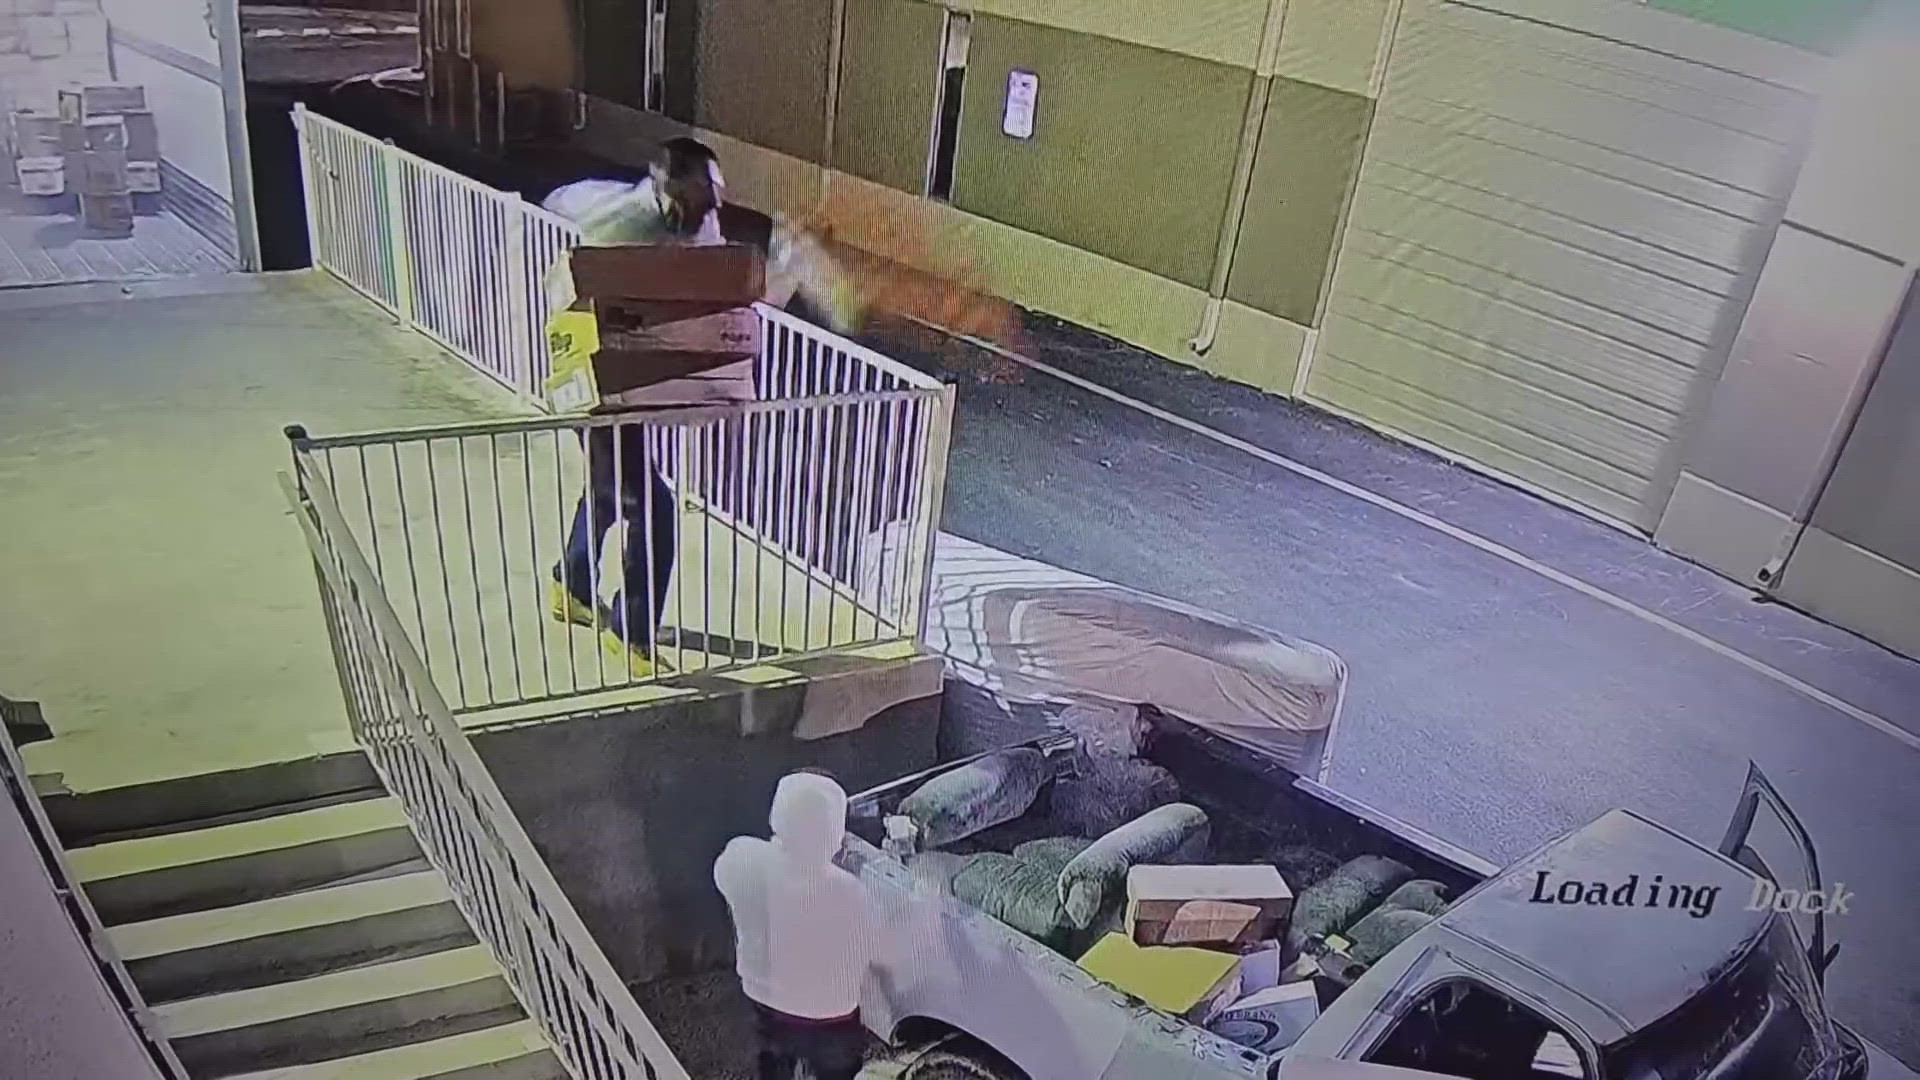 Thieves stealing thousands of dollars worth of goods at Smashin Crab caught on camera